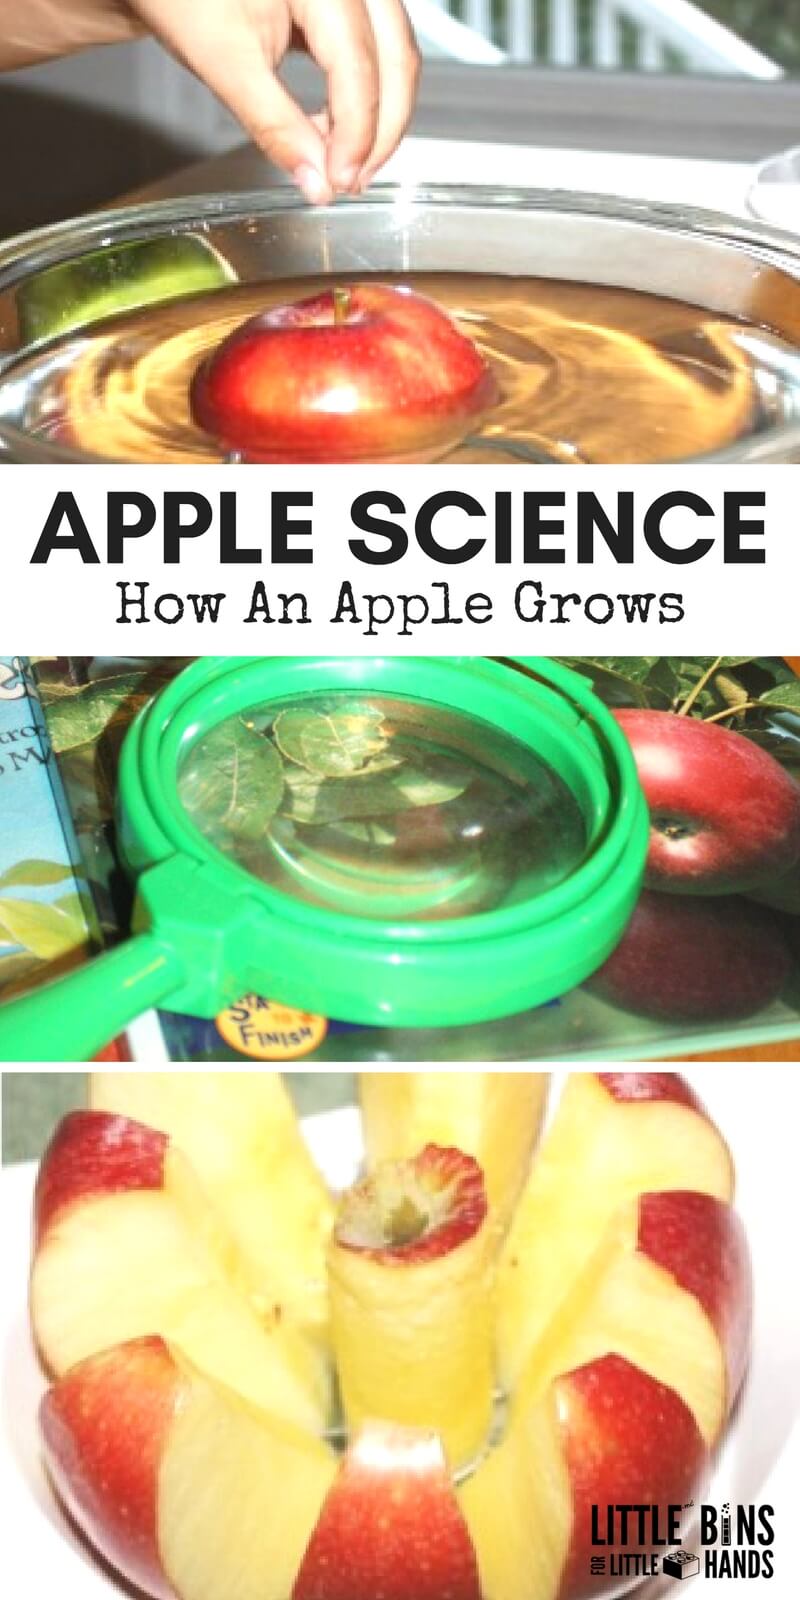 Learn how an apple grows for fun fall preschool science. Simple apple science activity for young kids to learn all about apples. Great for Apple STEM activities, Ten Apples Up On Top activities, and fall science activities!